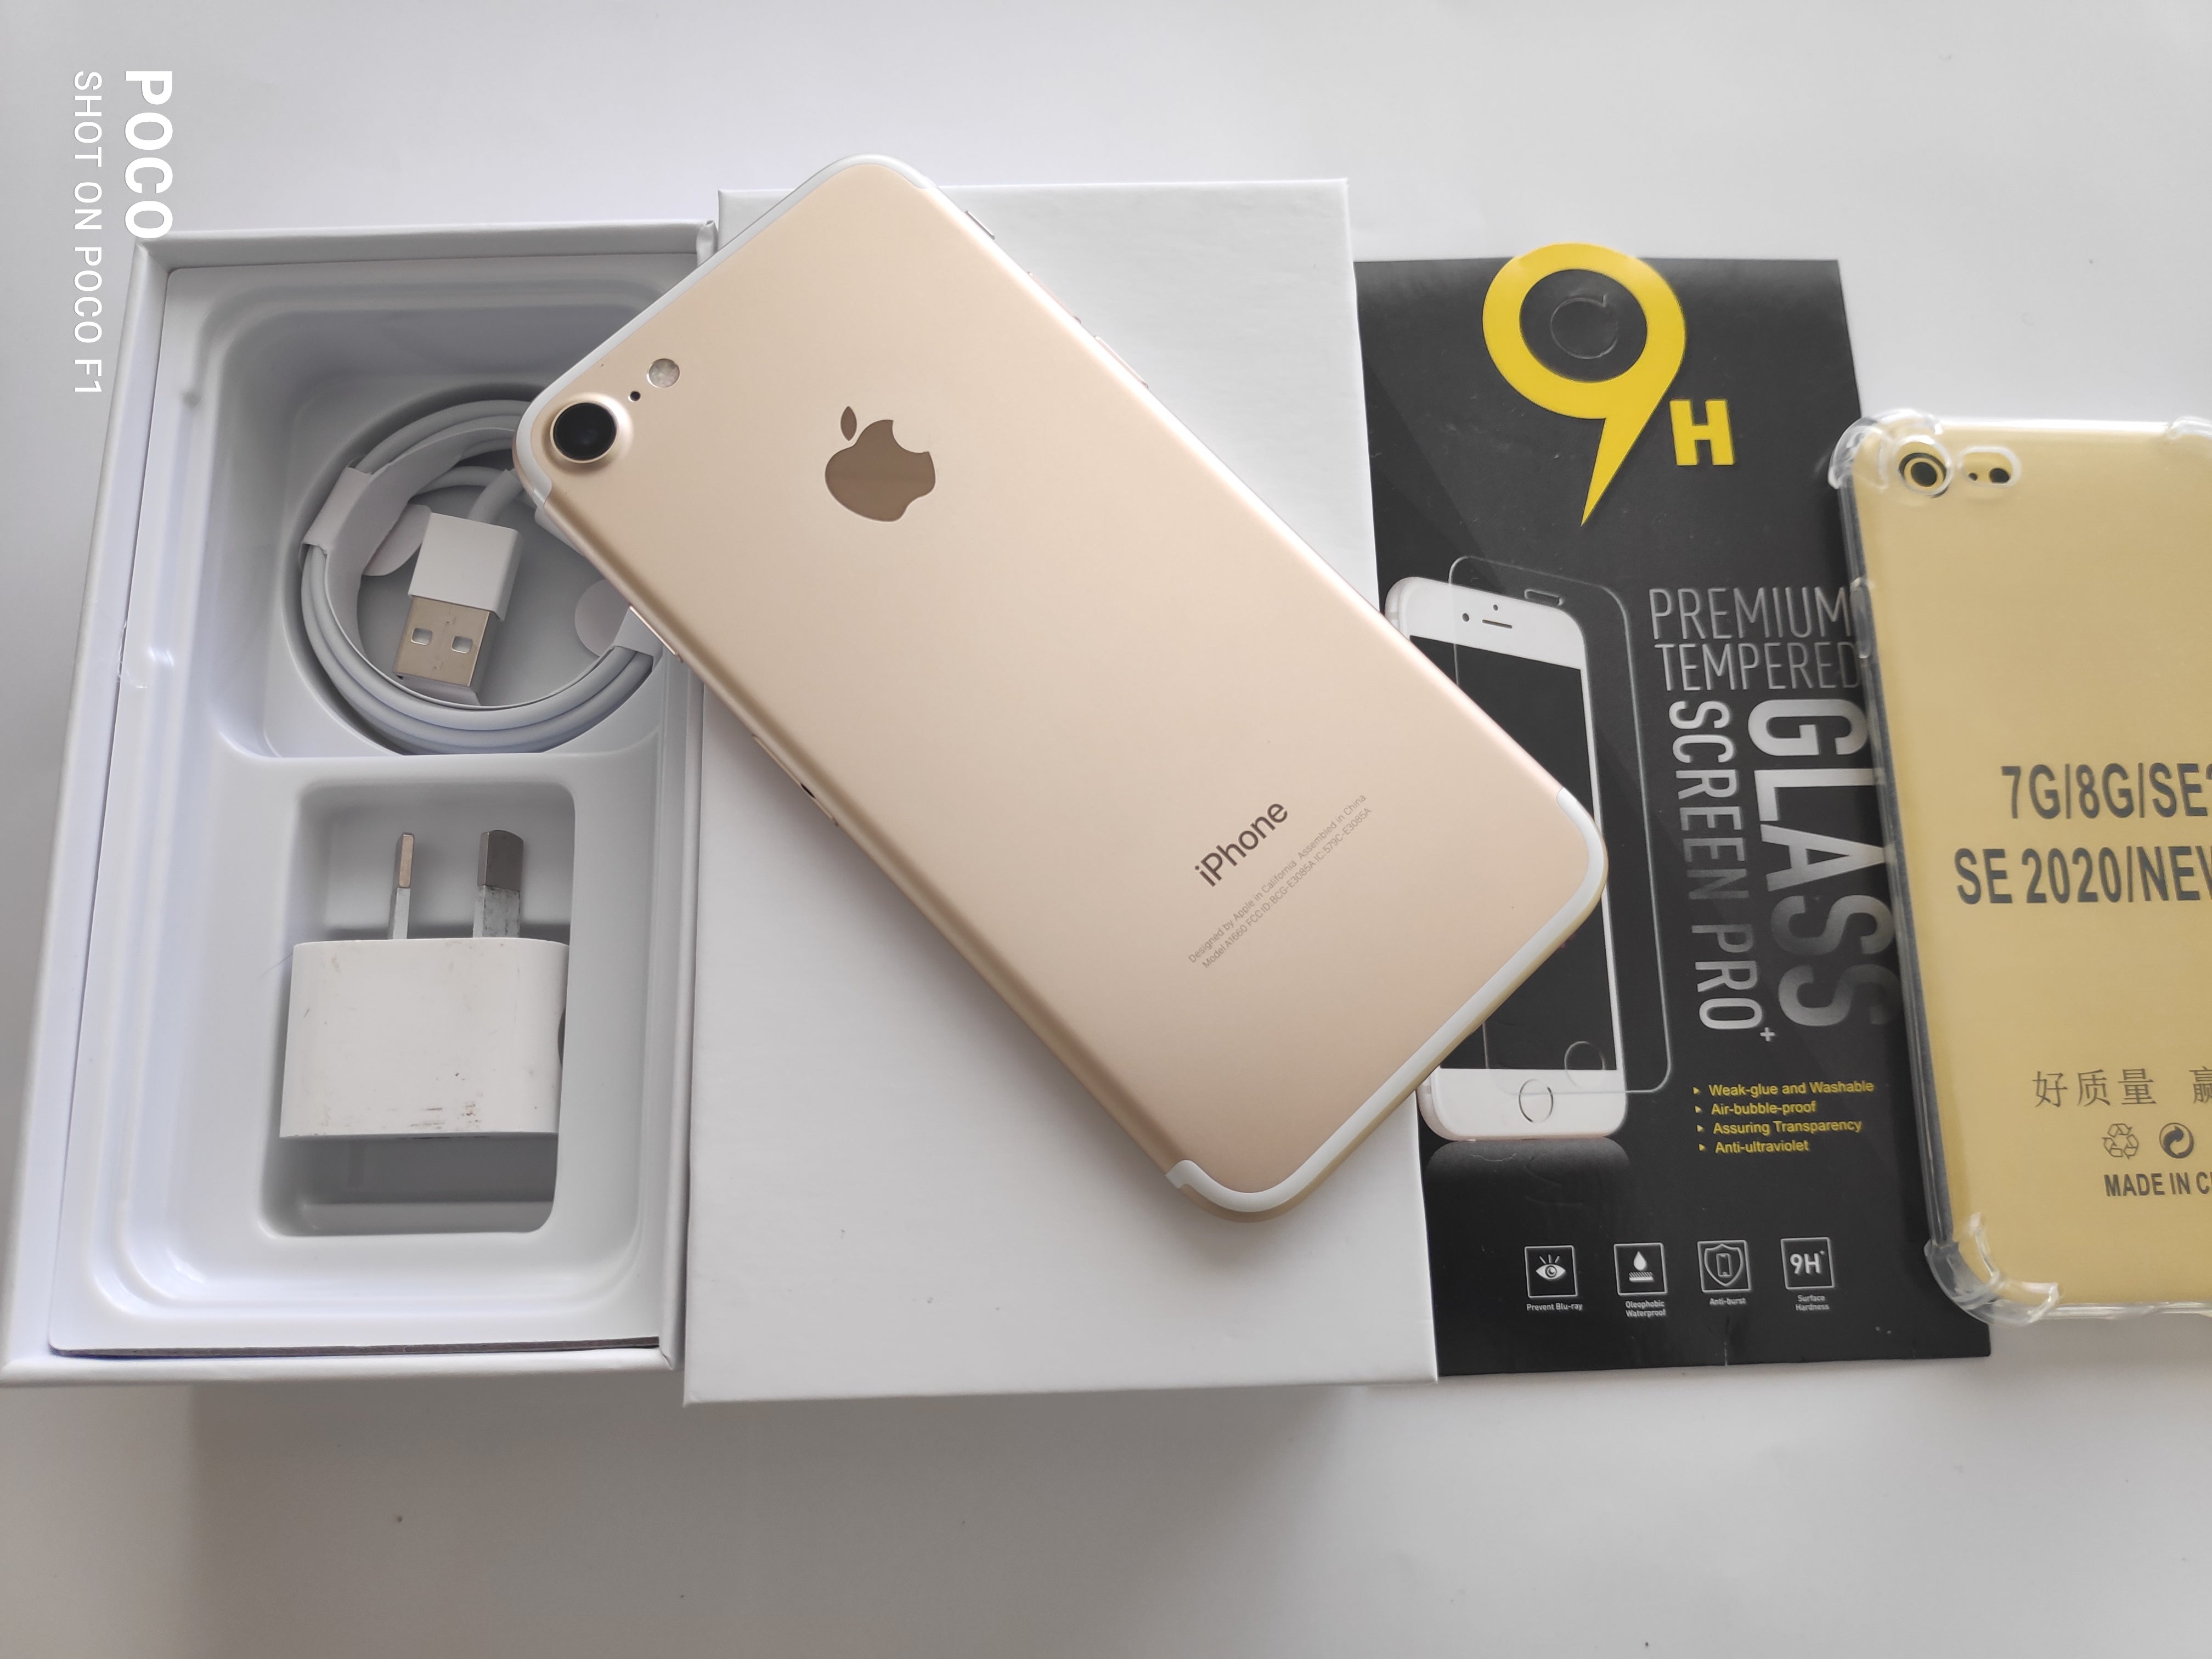 Apple iPhone 7 32GB Gold - New Battery, Case, Glass Screen Protector & Shipping (As New)